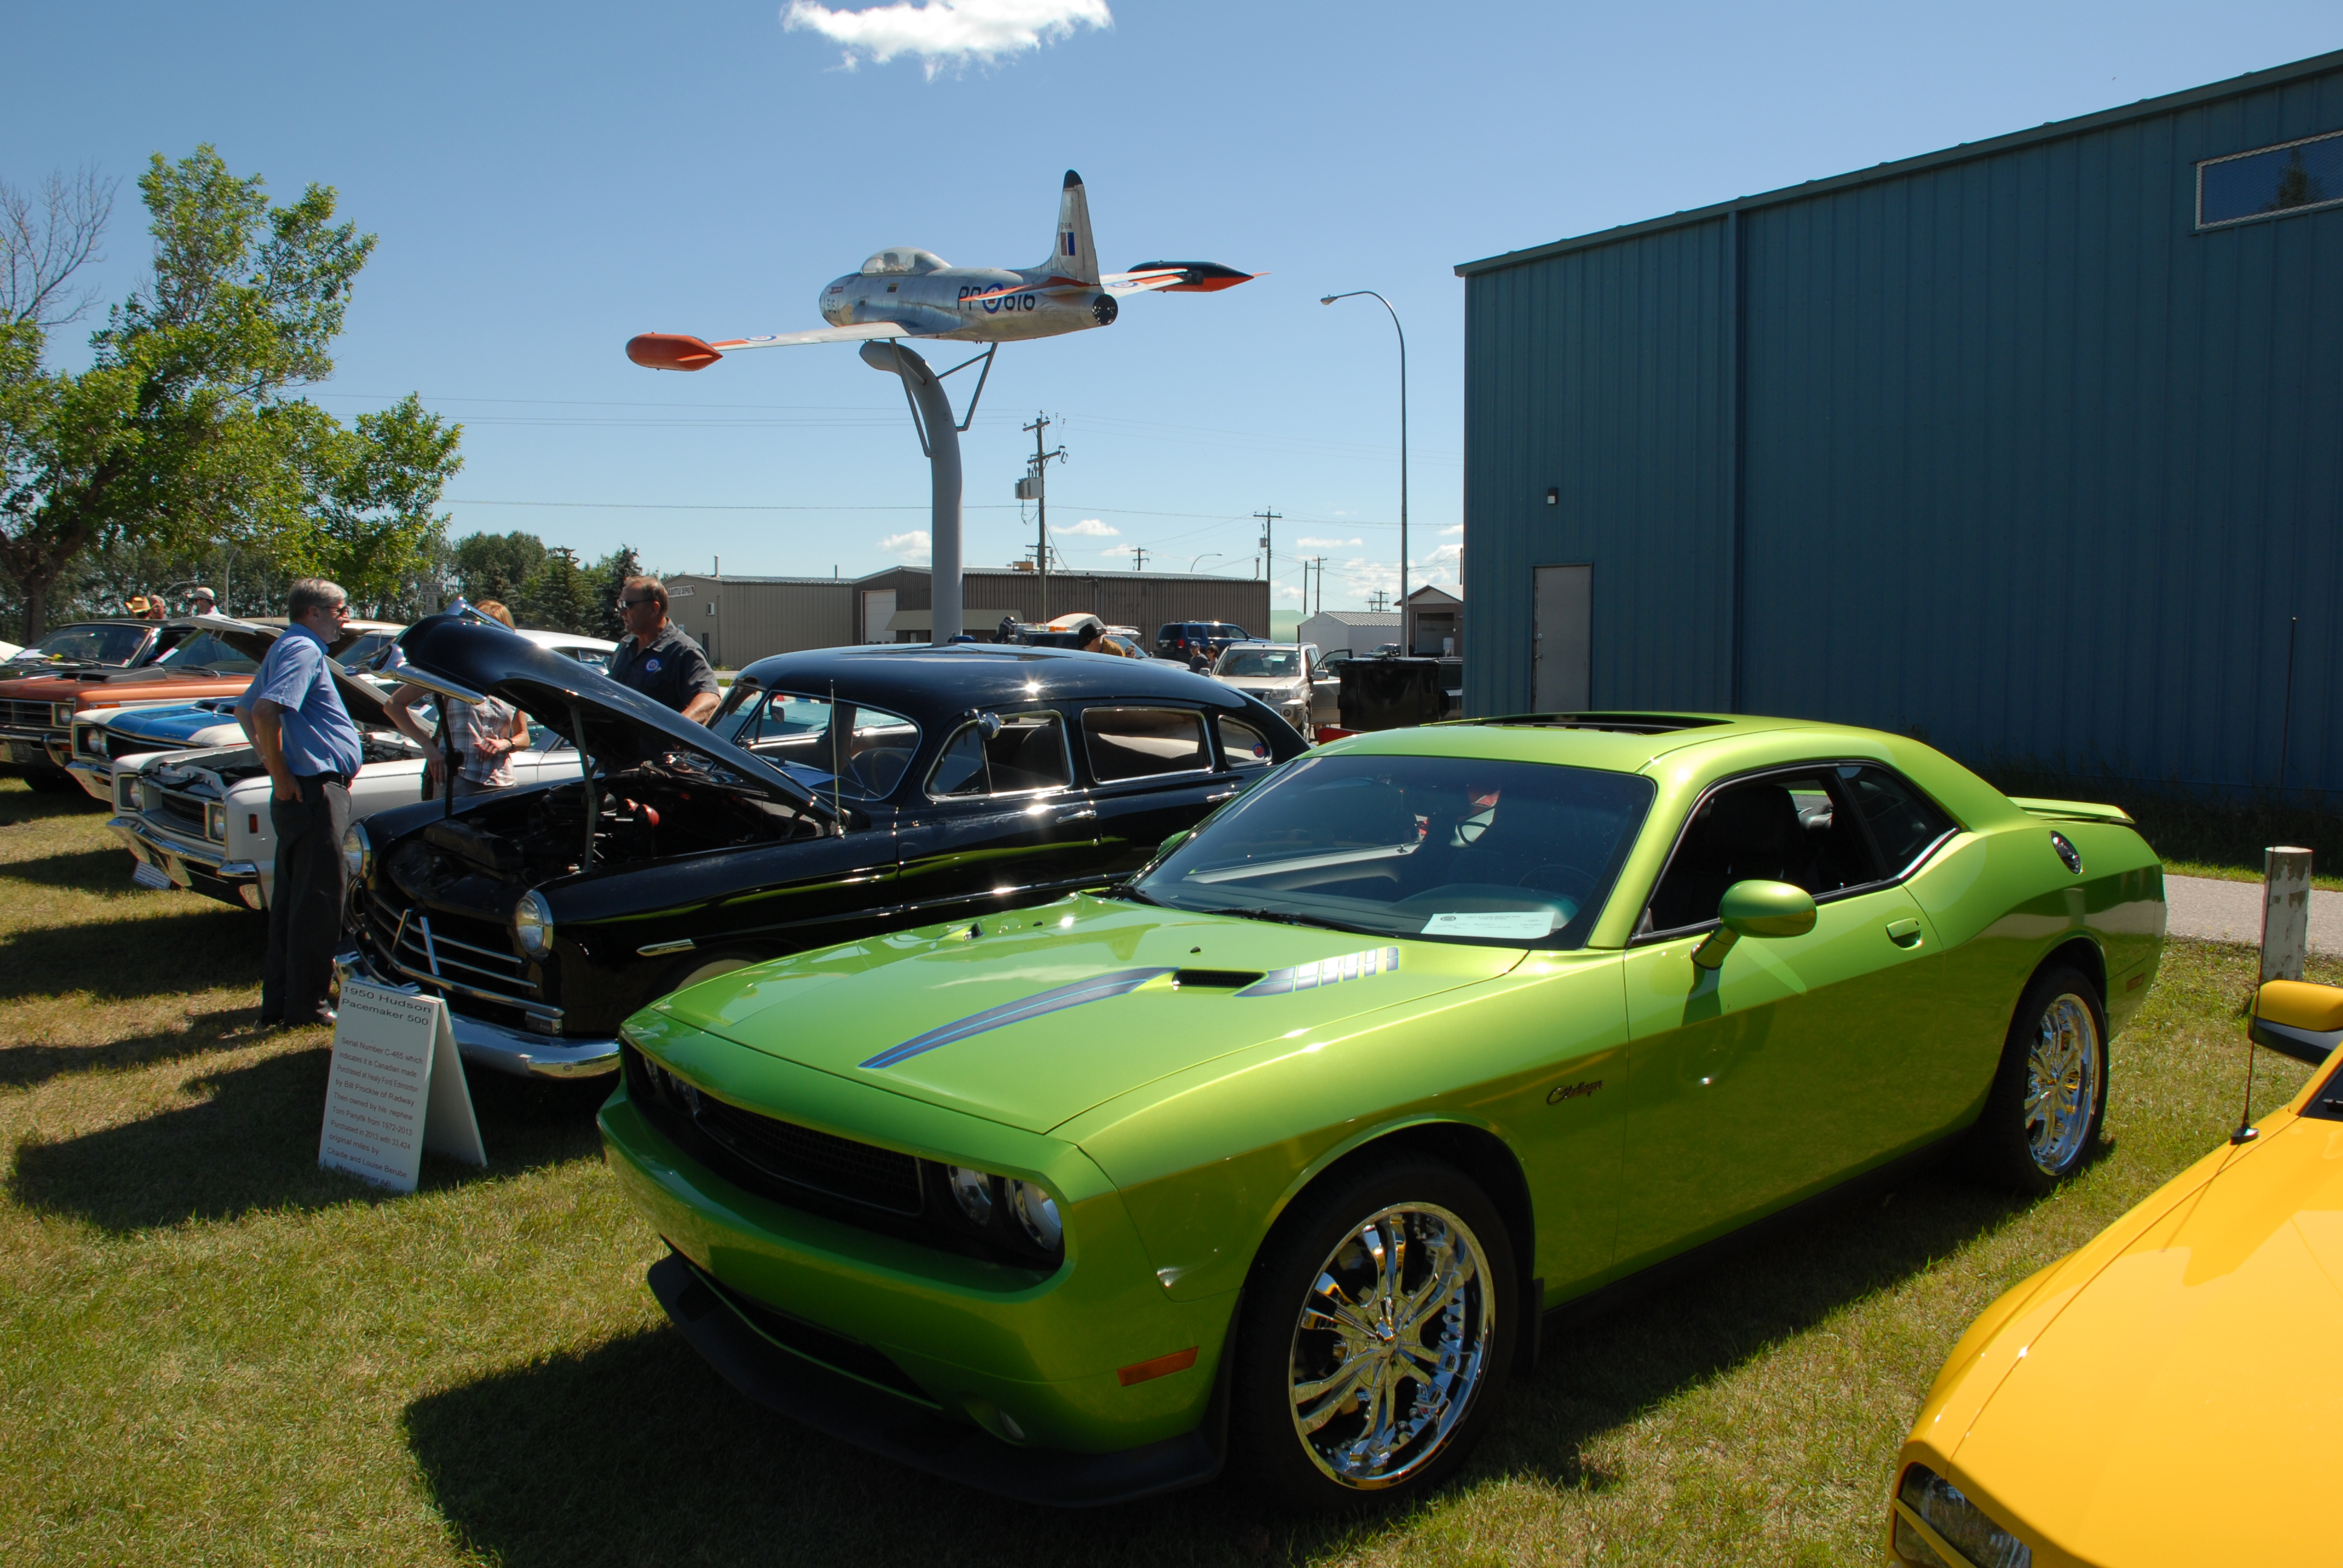 The July 18 ‘Field of Dreams’ event drew visitors and cars of all ages.